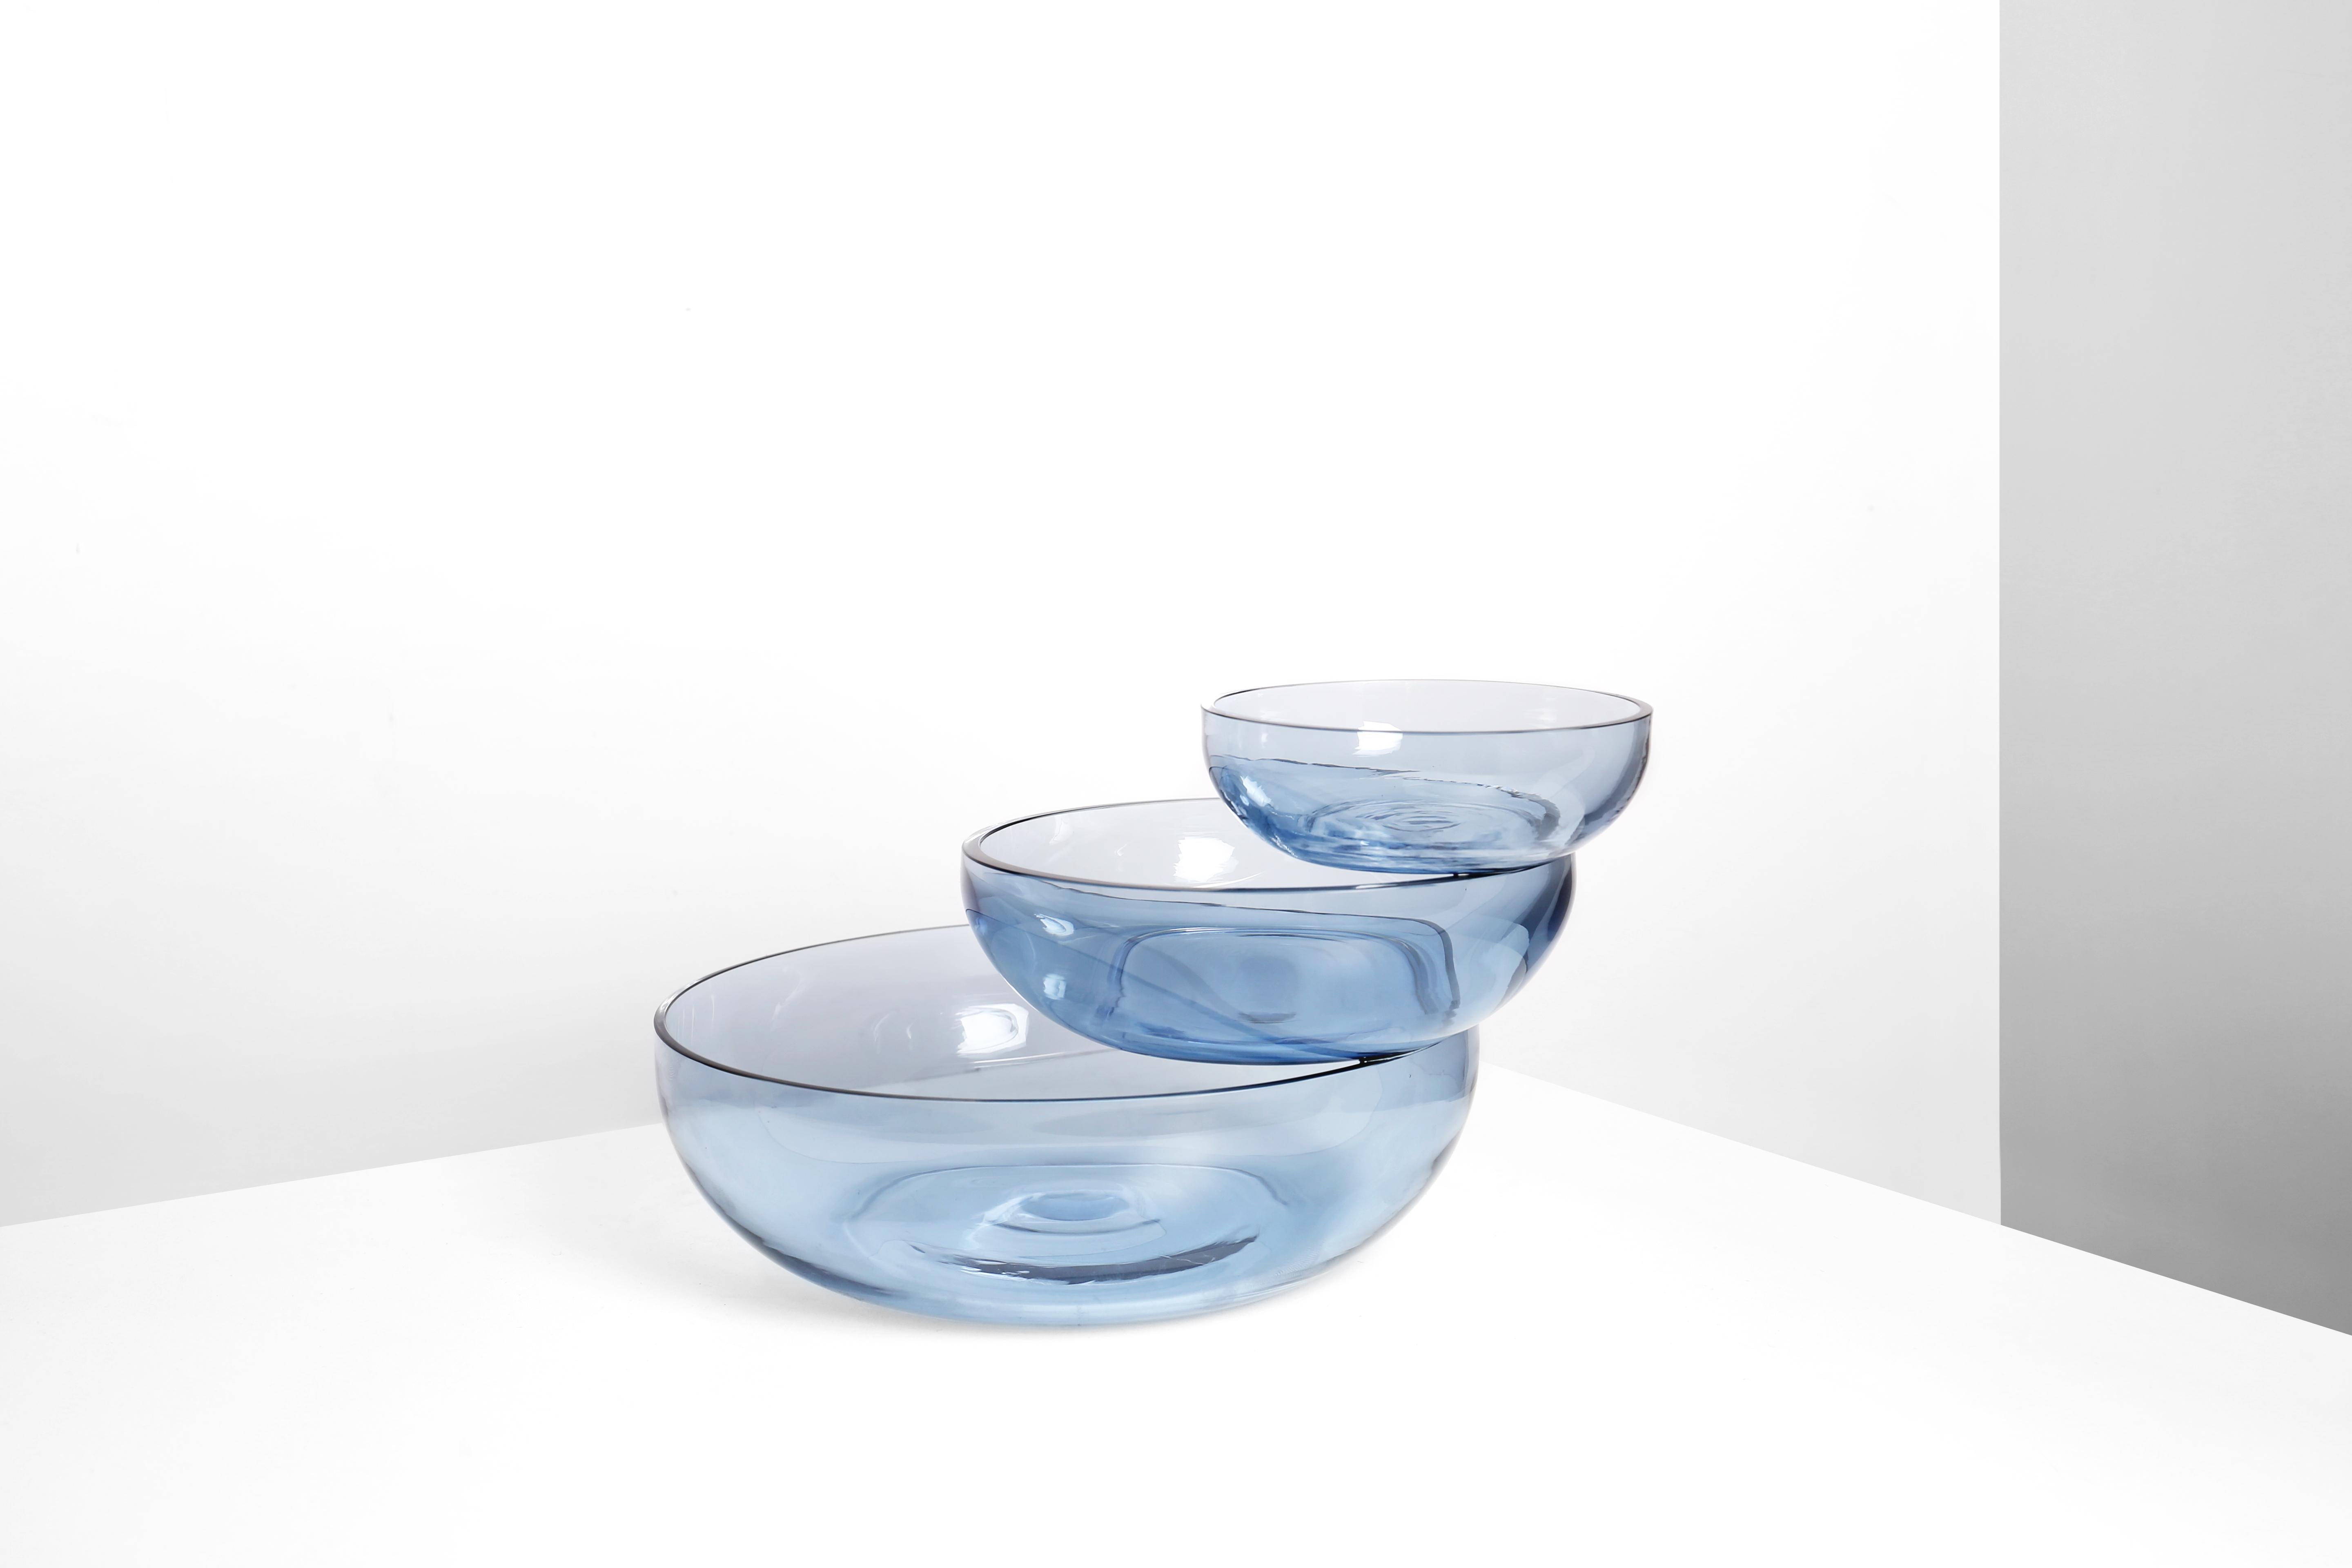 Glass balance bowls by Joel Escalona
Dimensions: D 70 x W 40 x H 25 cm
Materials: Glass
Also available in different dimensions and materials.

To witness how one of our designs is manufactured in NOUVEL Studio is quite the experience. To make a